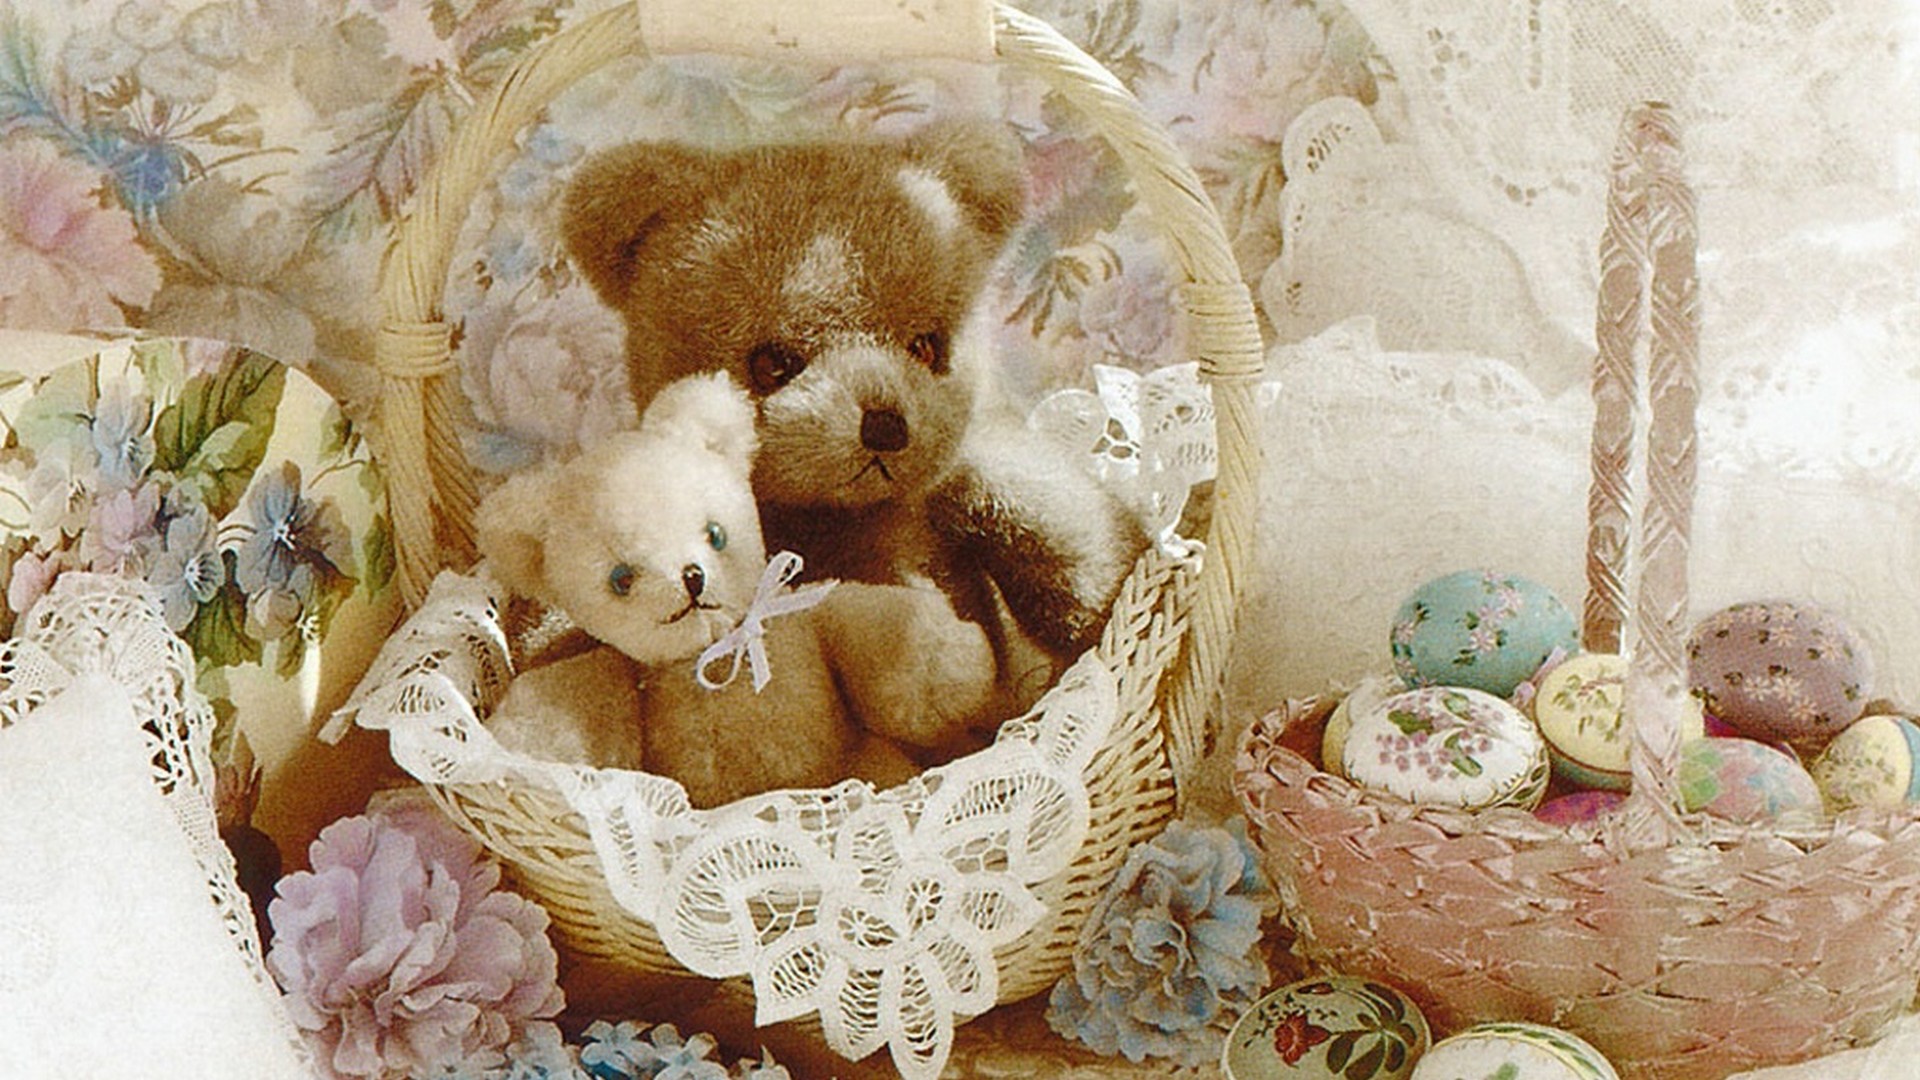 Cute Teddy Bear Desktop Backgrounds HD with resolution 1920X1080 pixel. You can use this wallpaper as background for your desktop Computer Screensavers, Android or iPhone smartphones